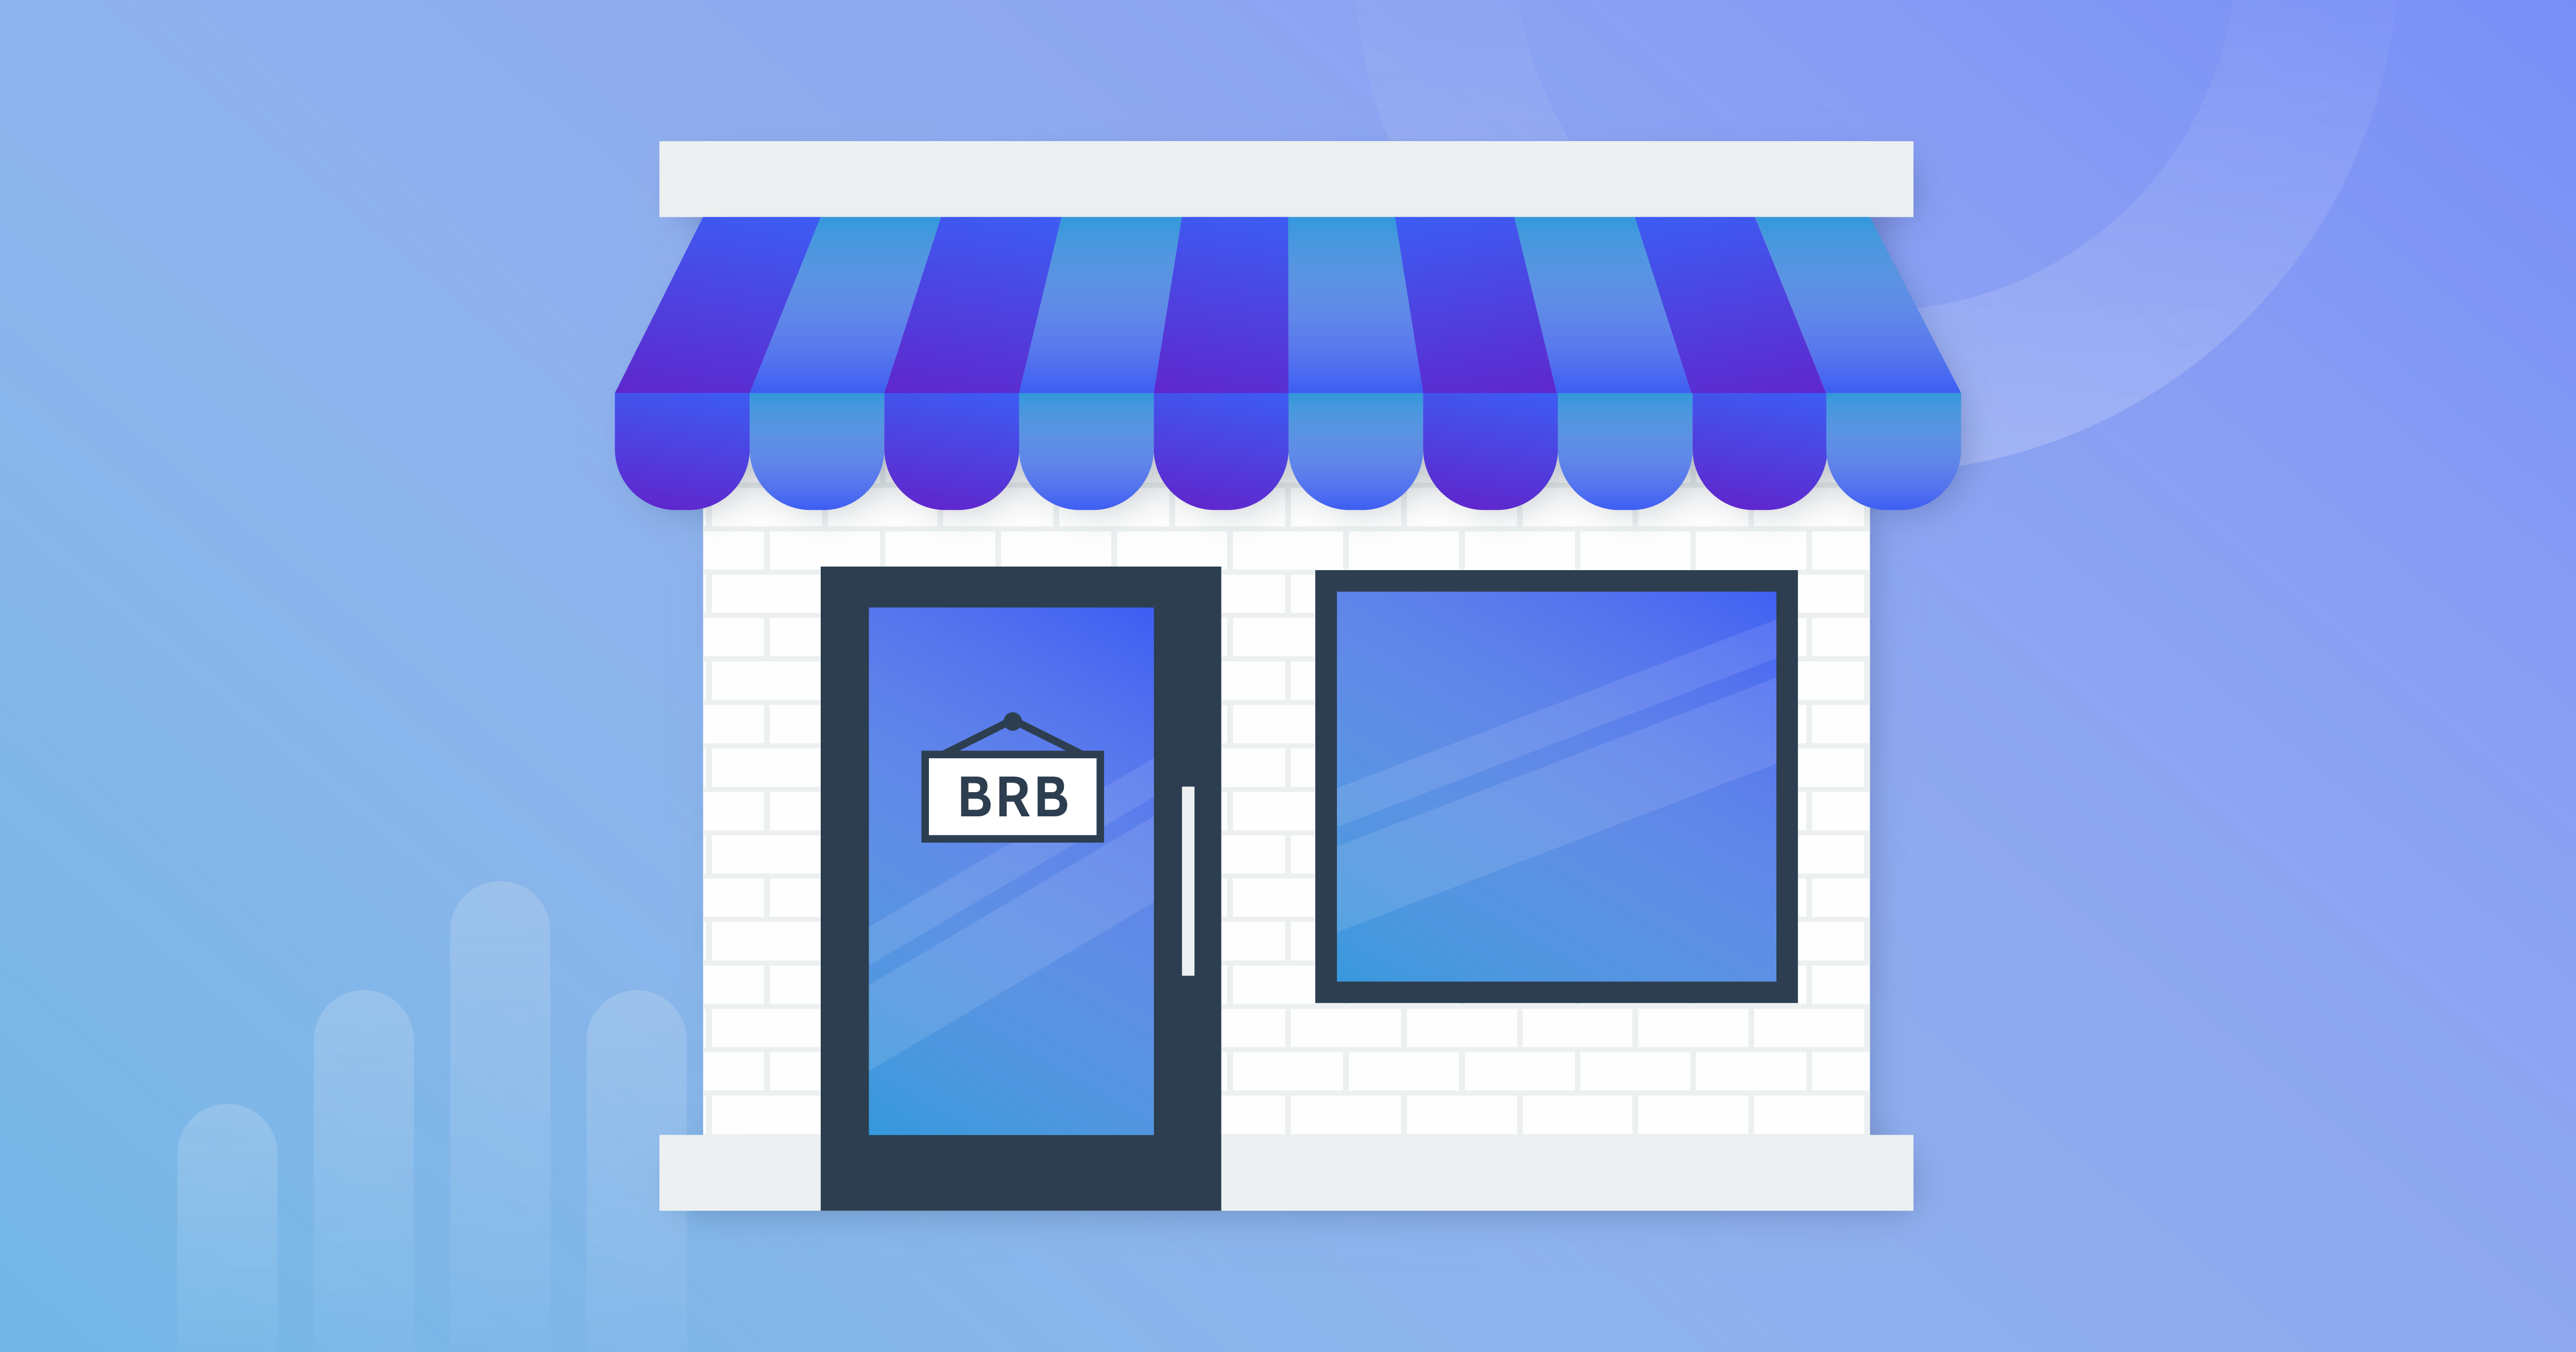 A graphic image of a store front with a sign on the door that says "BRB", short for "be right back".